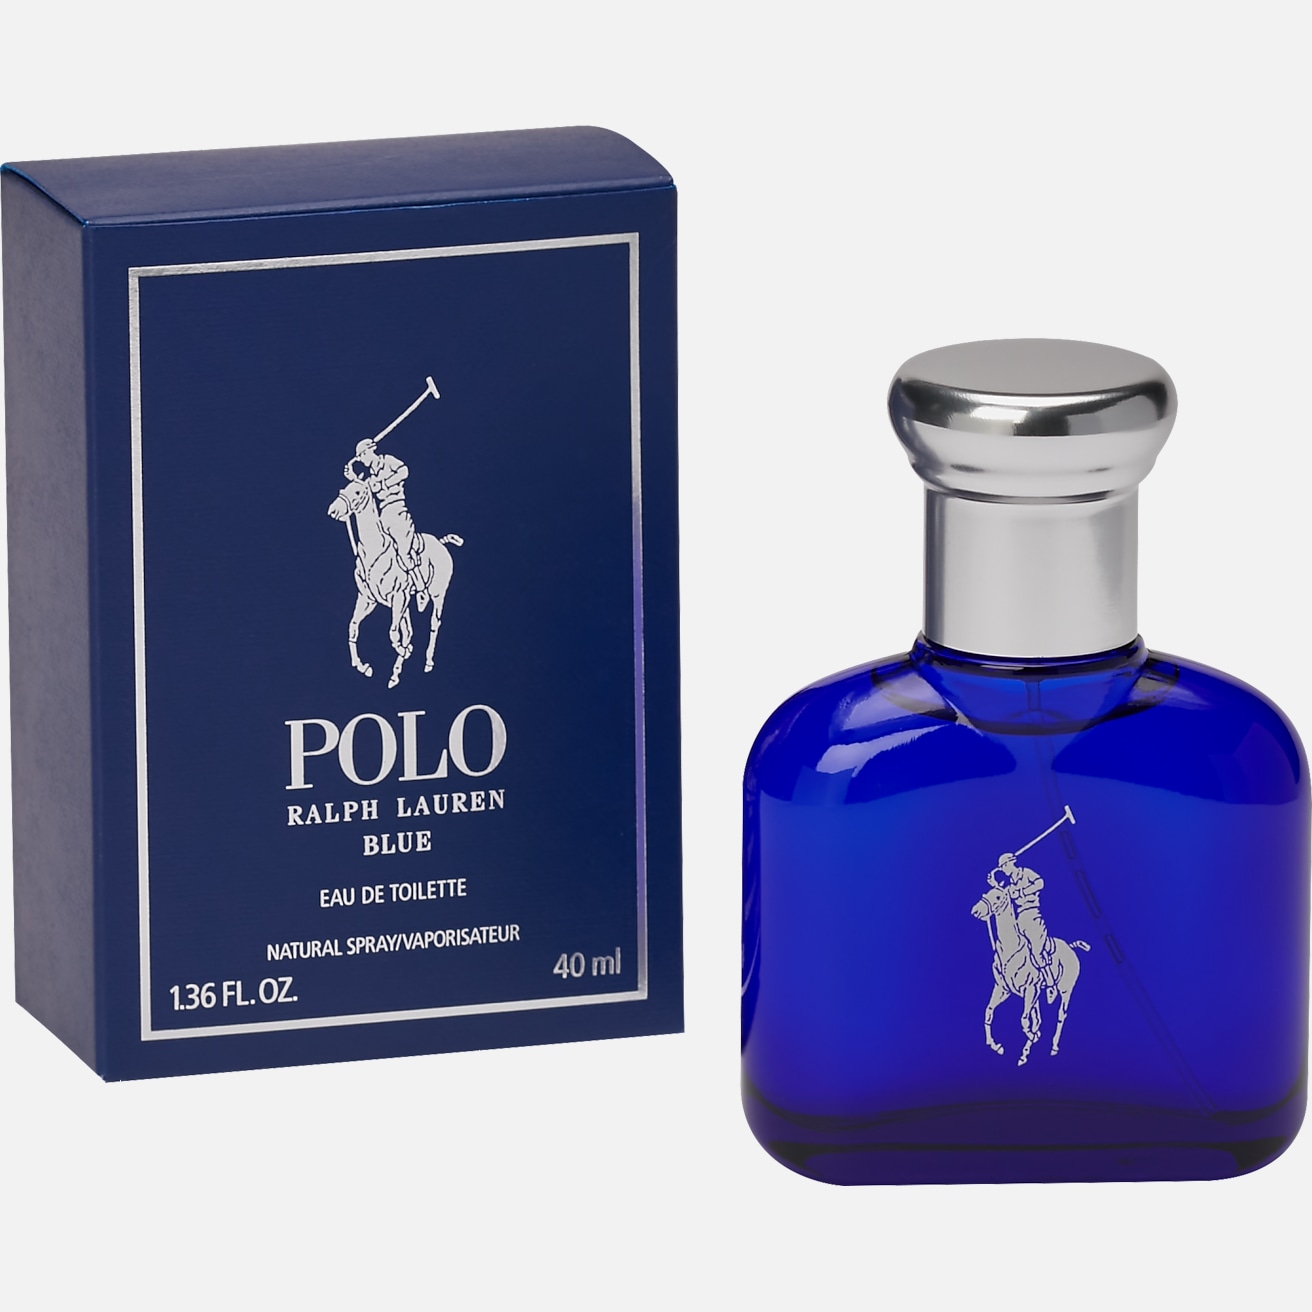 https://image.menswearhouse.com/is/image/TMW/TMW_8YF6_00_POLO_RALPH_LAUREN_FRAGRANCES_MISC_MAIN?imPolicy=pdp-mob-2x